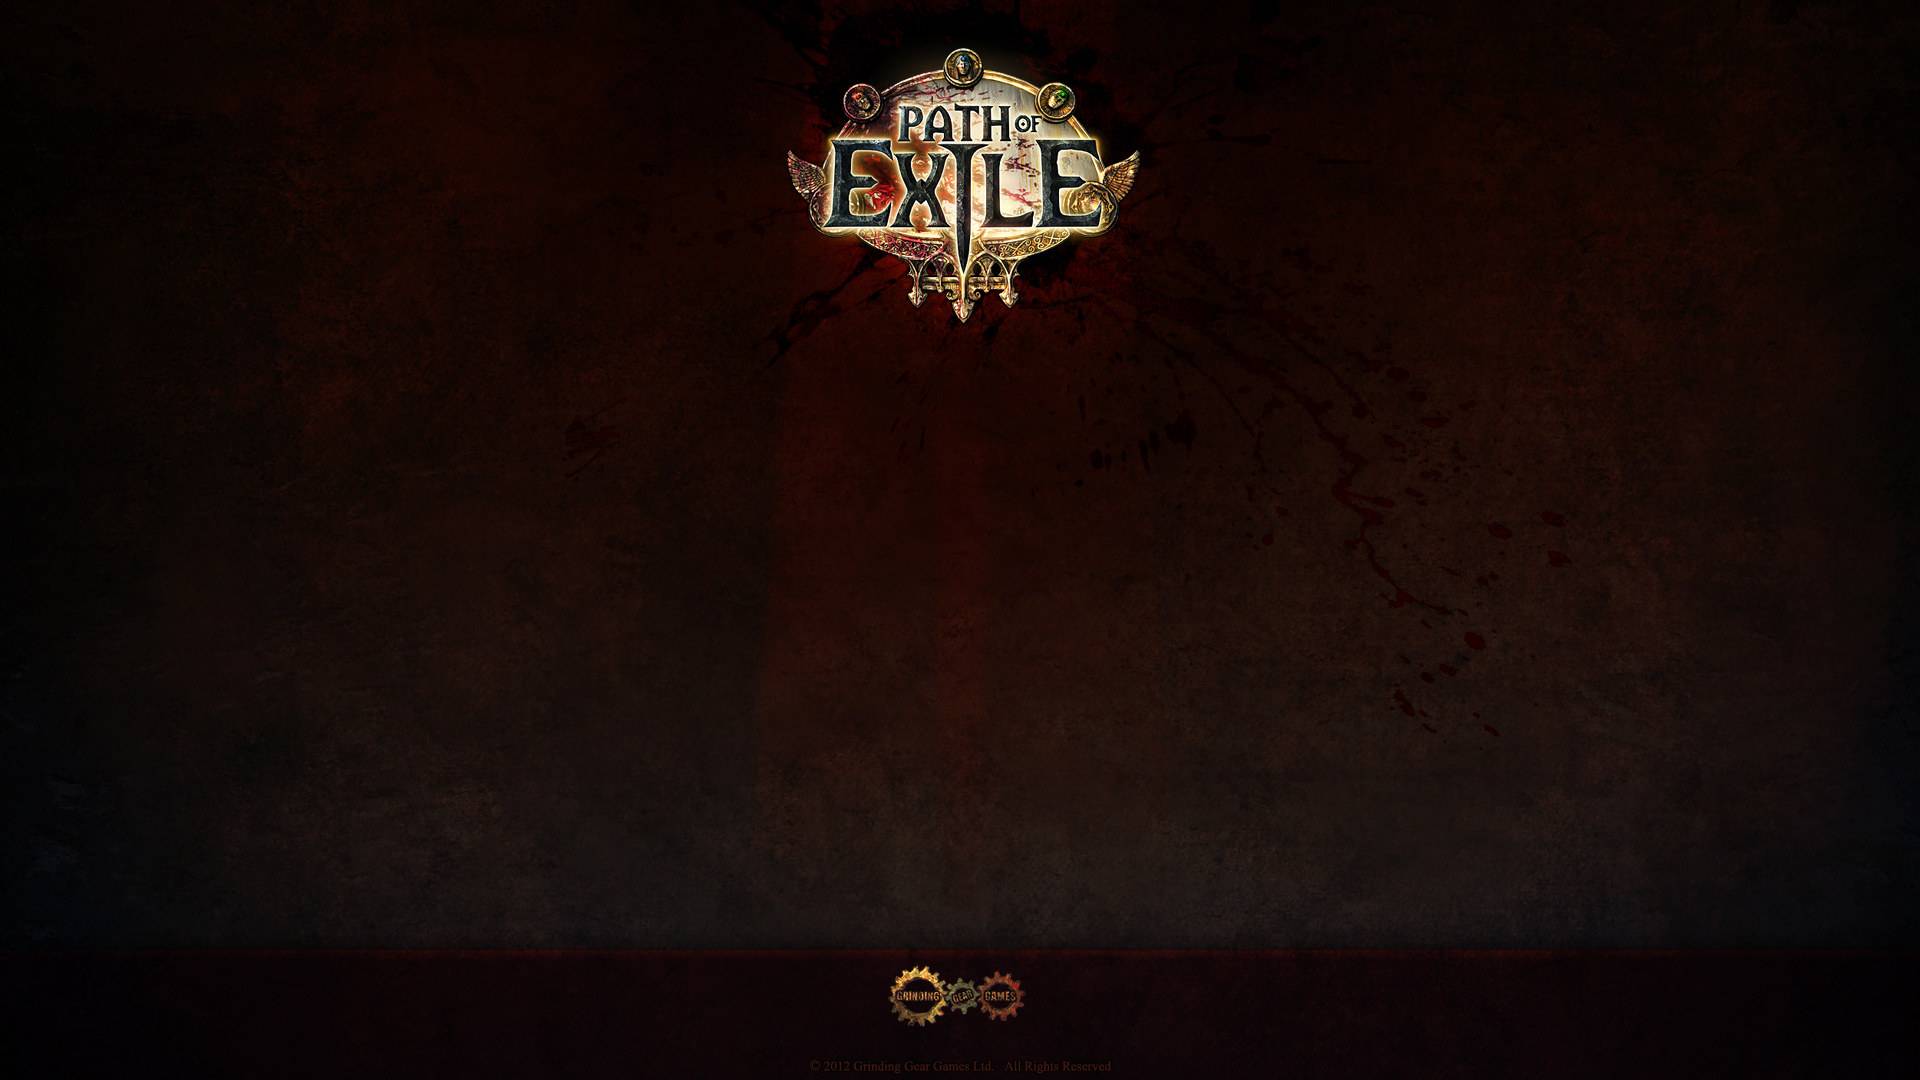 Path of Exile Wallpapers